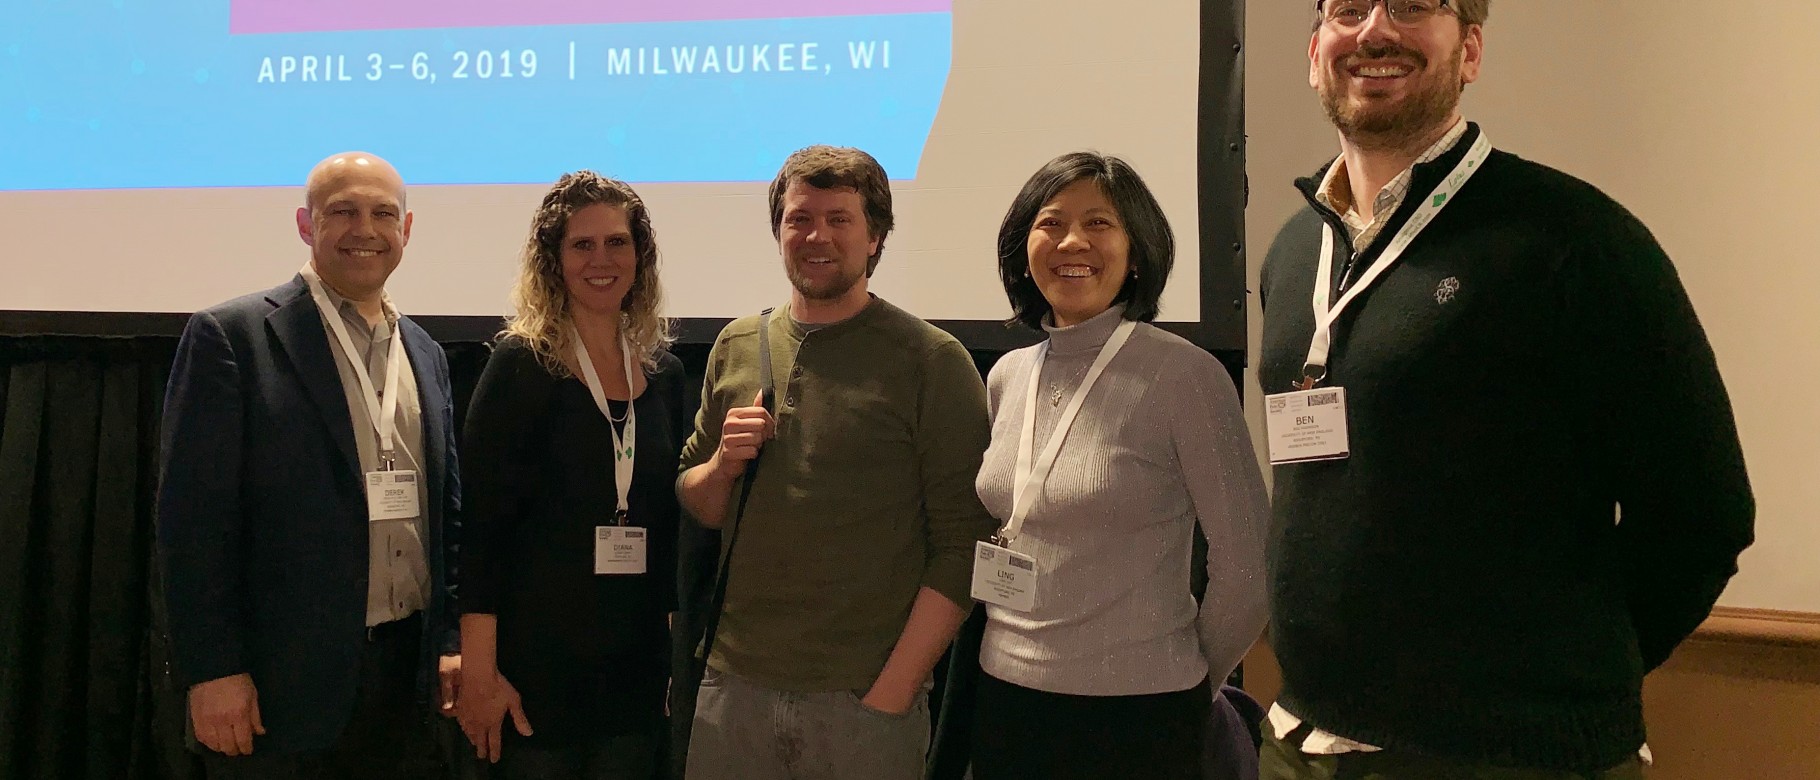 Members of the Center for Excellence in the Neurosciences recently traveled to Milwaukee for conferences on pain